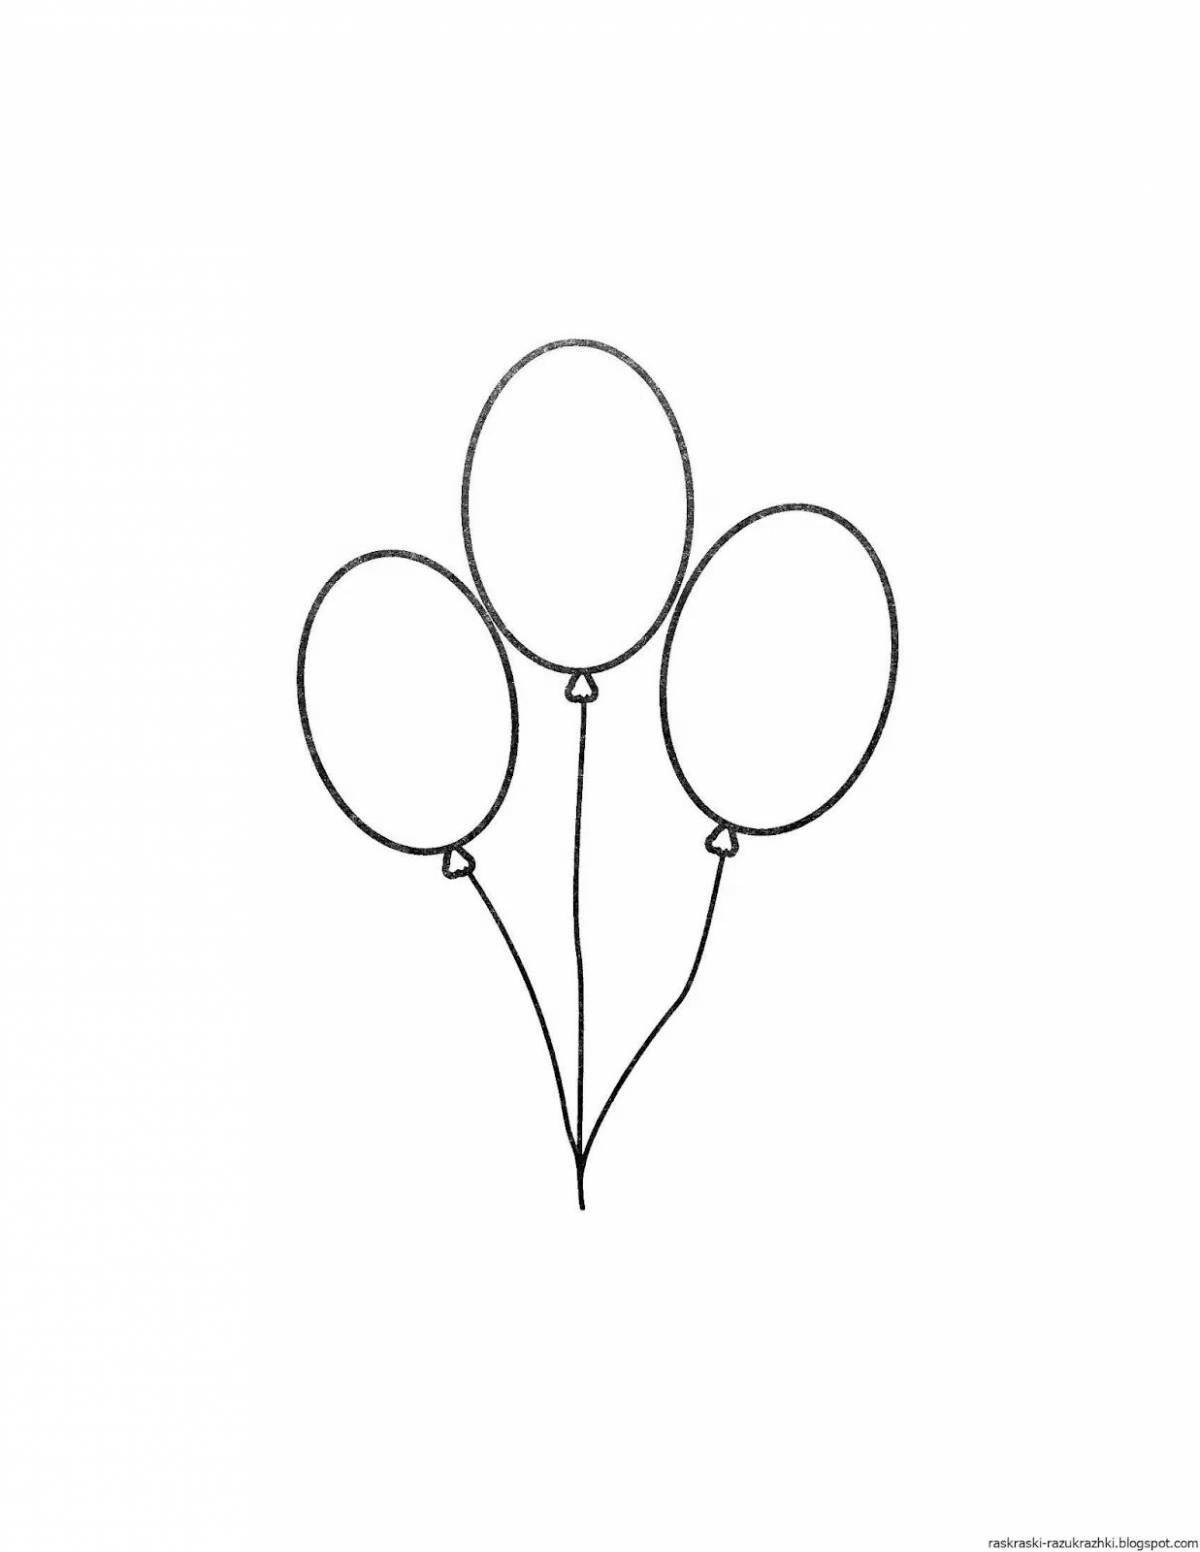 Glamorous coloring book with balloons for kids